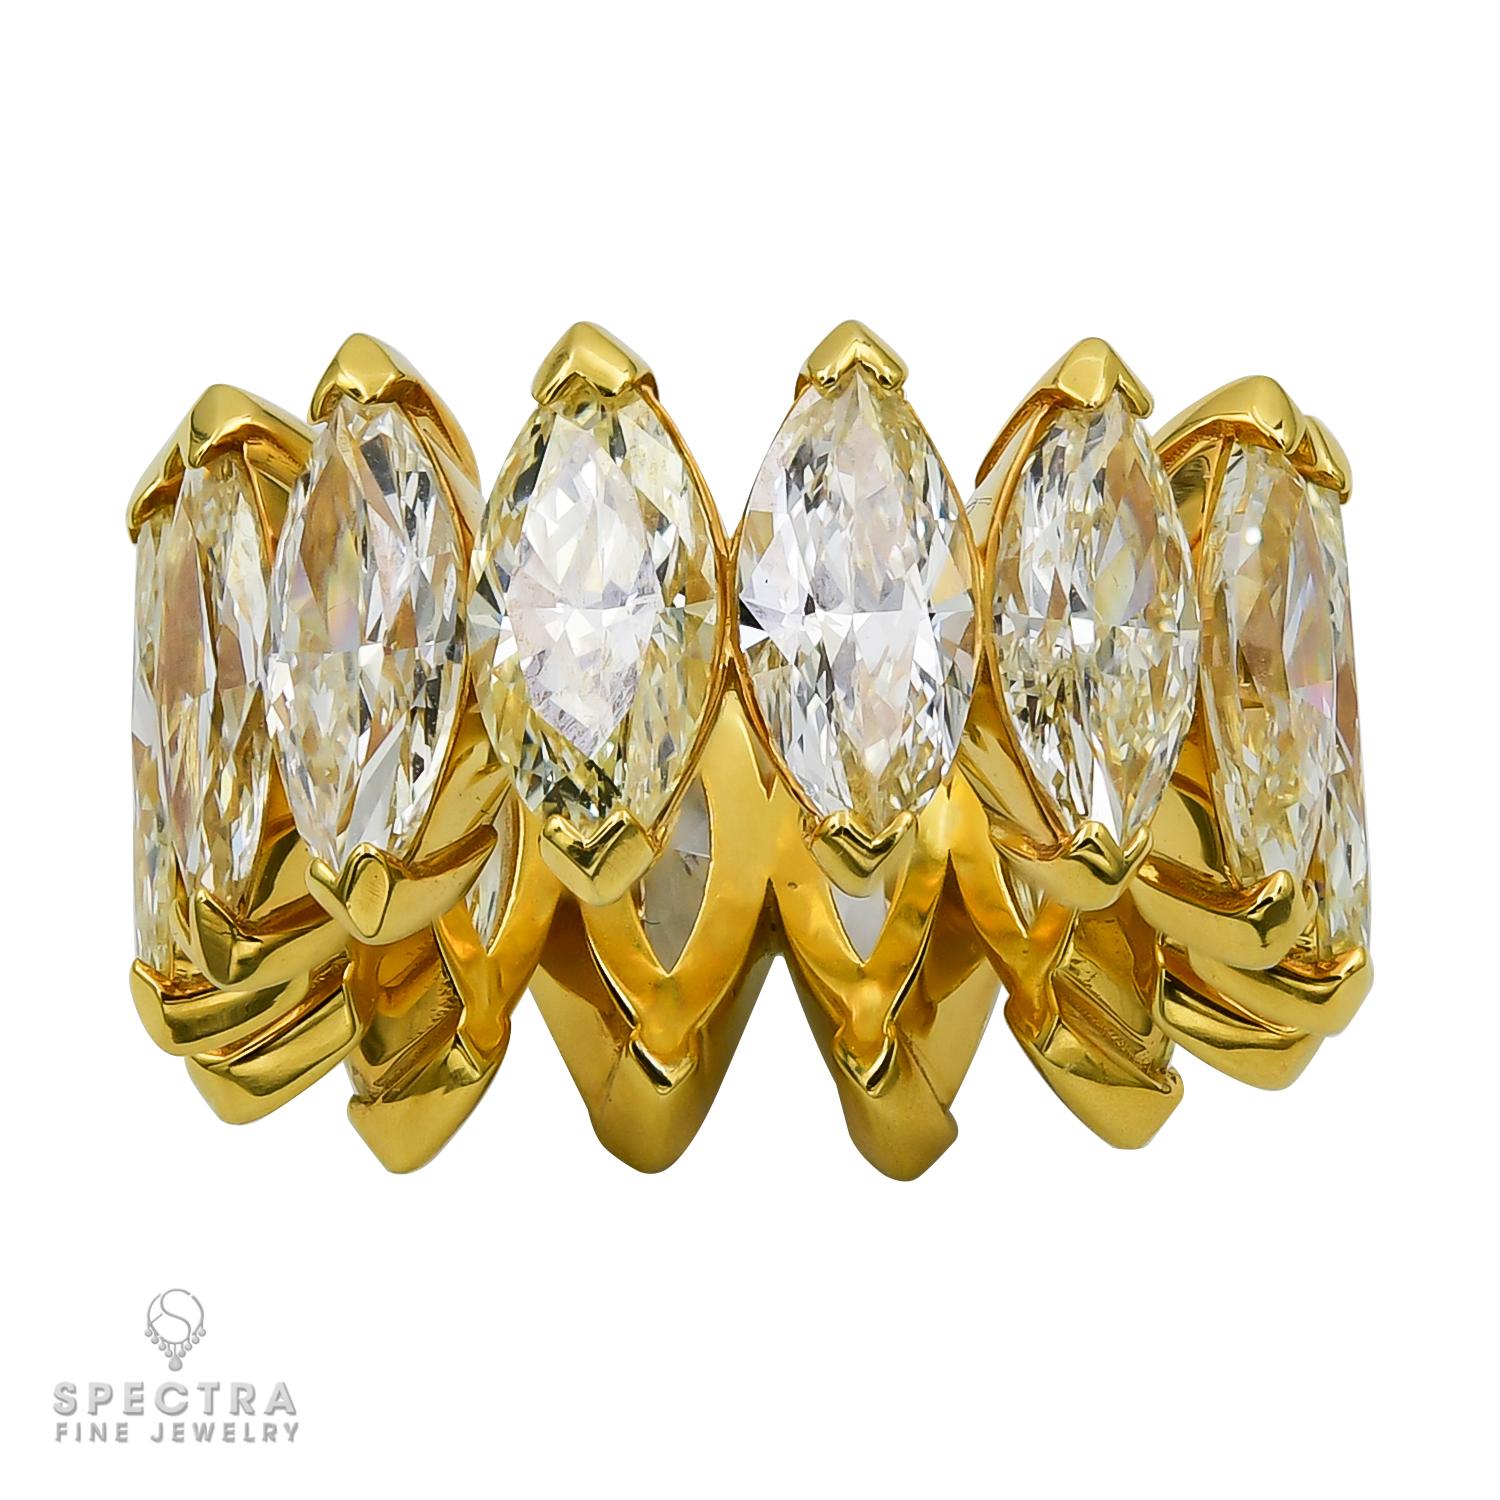 An eternity band comprising of 14 marquise-shape yellow diamonds weighing a total of 12.37 carats.
Each diamond is approximately 0.88 carat. 
The diamonds are all natural, not certified. Appraisal available upon request.
Metal is 18k yellow gold,